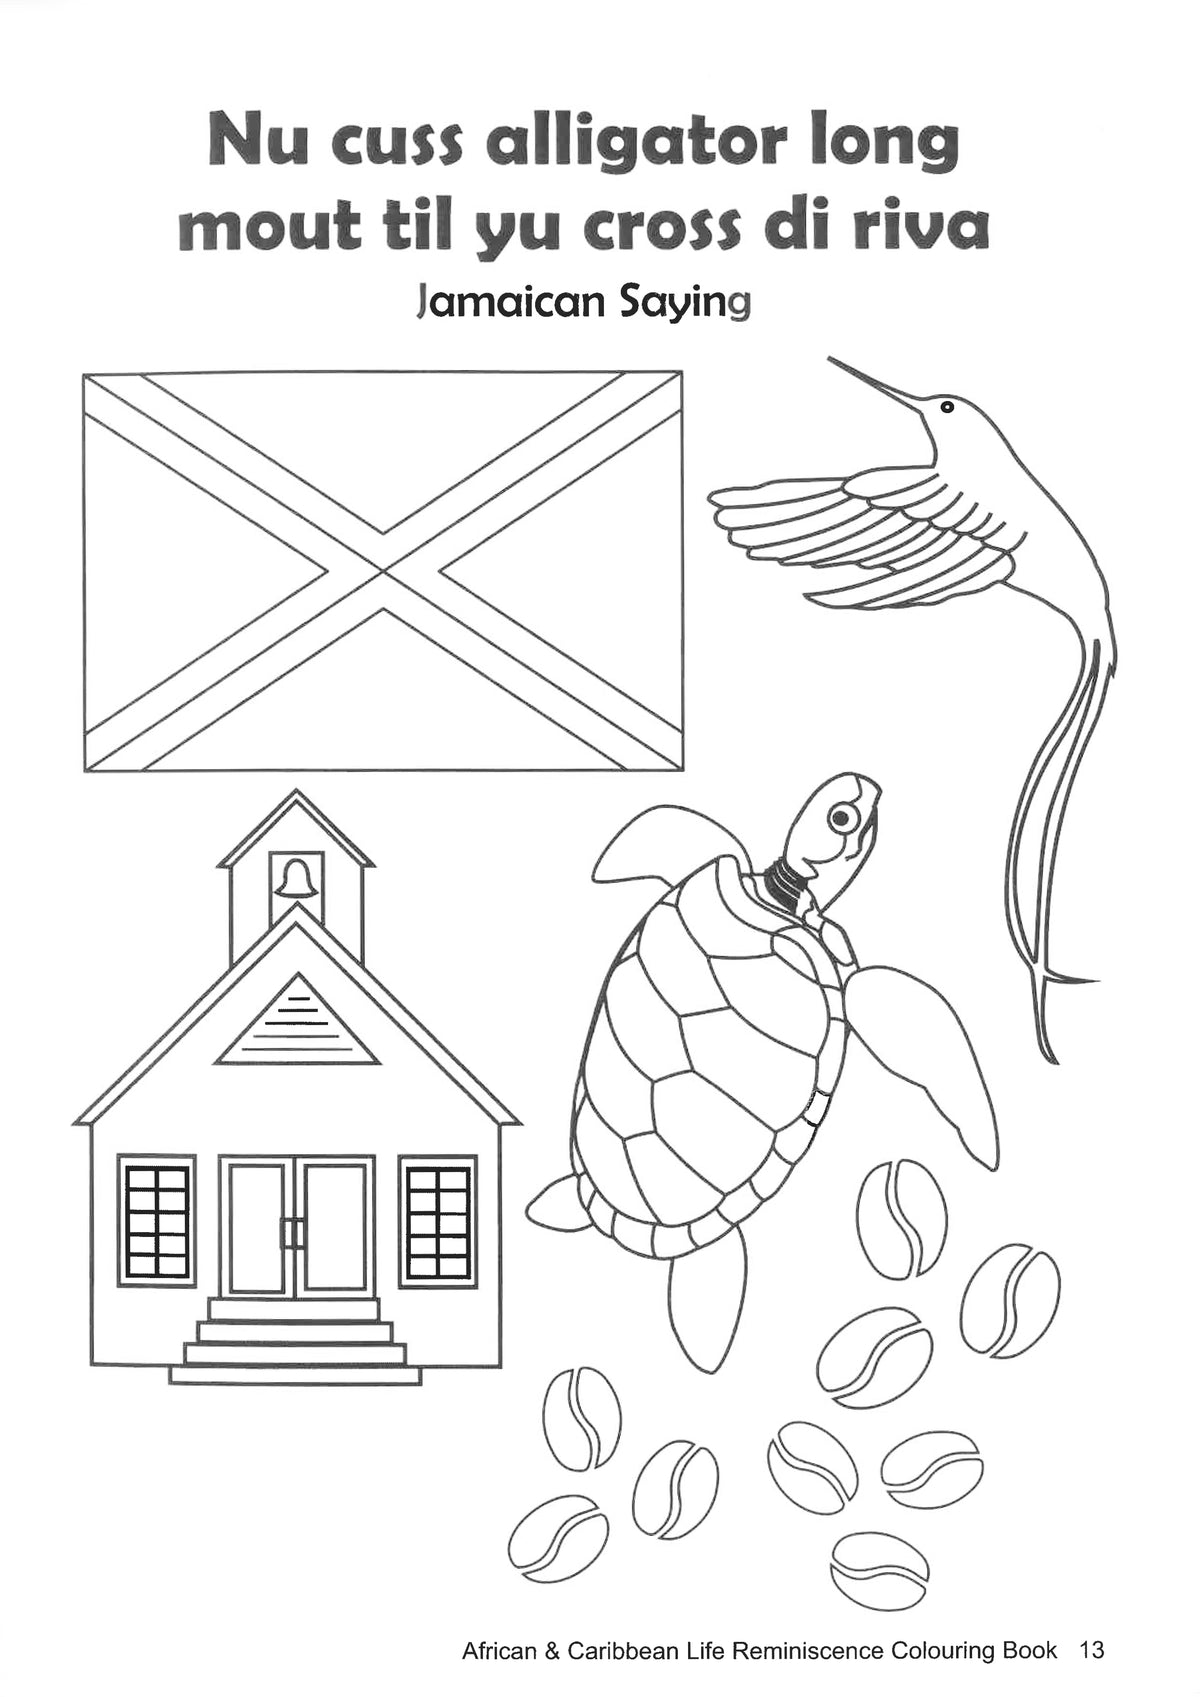 Illustration of Jamaican saying and images such as turtle, hummingbird, coffee beans, church and a flag which can be coloured in